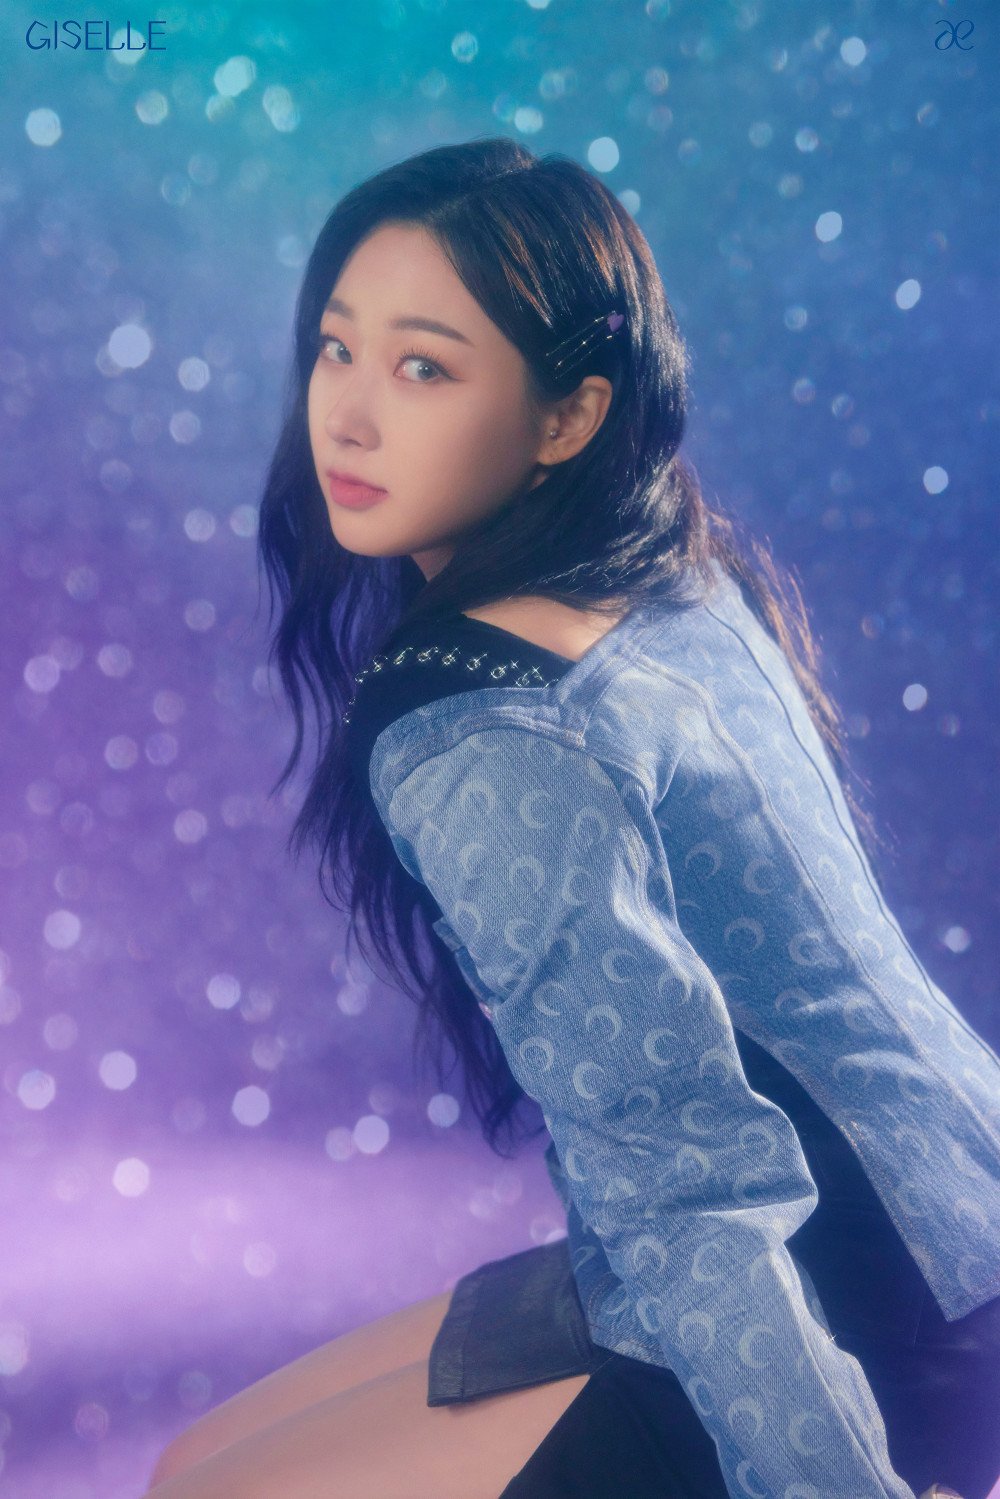 Aespa Release Dreamy Teaser Image Of Giselle Winter For Special